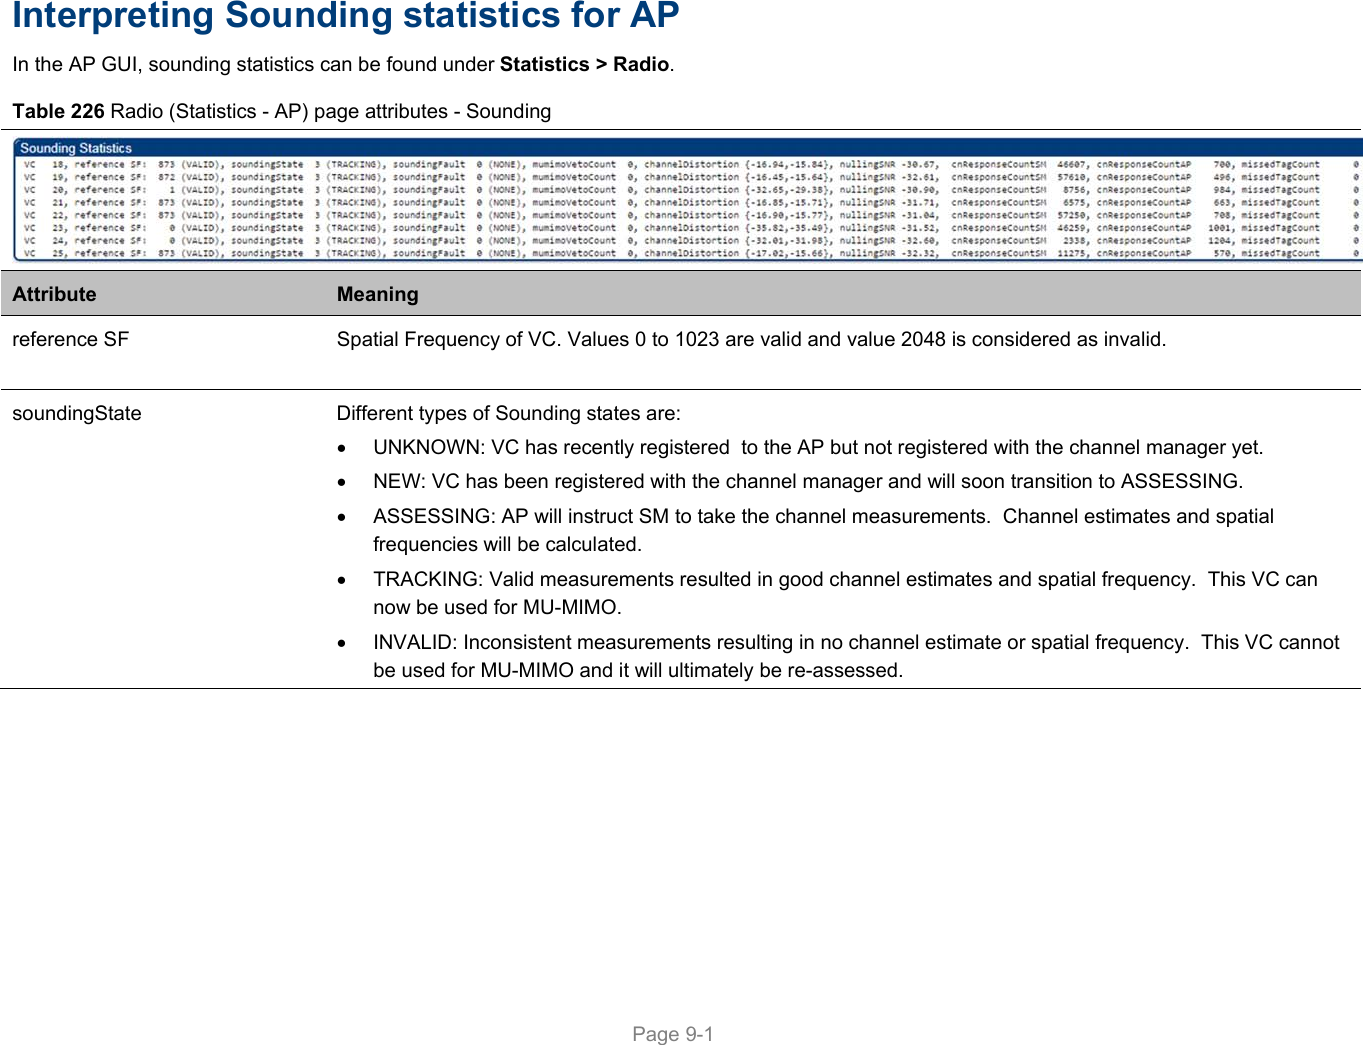     Page 9-1   Interpreting Sounding statistics for AP In the AP GUI, sounding statistics can be found under Statistics &gt; Radio. Table 226 Radio (Statistics - AP) page attributes - Sounding Attribute  Meaning reference SF  Spatial Frequency of VC. Values 0 to 1023 are valid and value 2048 is considered as invalid. soundingState  Different types of Sounding states are:   UNKNOWN: VC has recently registered  to the AP but not registered with the channel manager yet.   NEW: VC has been registered with the channel manager and will soon transition to ASSESSING.   ASSESSING: AP will instruct SM to take the channel measurements.  Channel estimates and spatial frequencies will be calculated.   TRACKING: Valid measurements resulted in good channel estimates and spatial frequency.  This VC can now be used for MU-MIMO.   INVALID: Inconsistent measurements resulting in no channel estimate or spatial frequency.  This VC cannot be used for MU-MIMO and it will ultimately be re-assessed. 